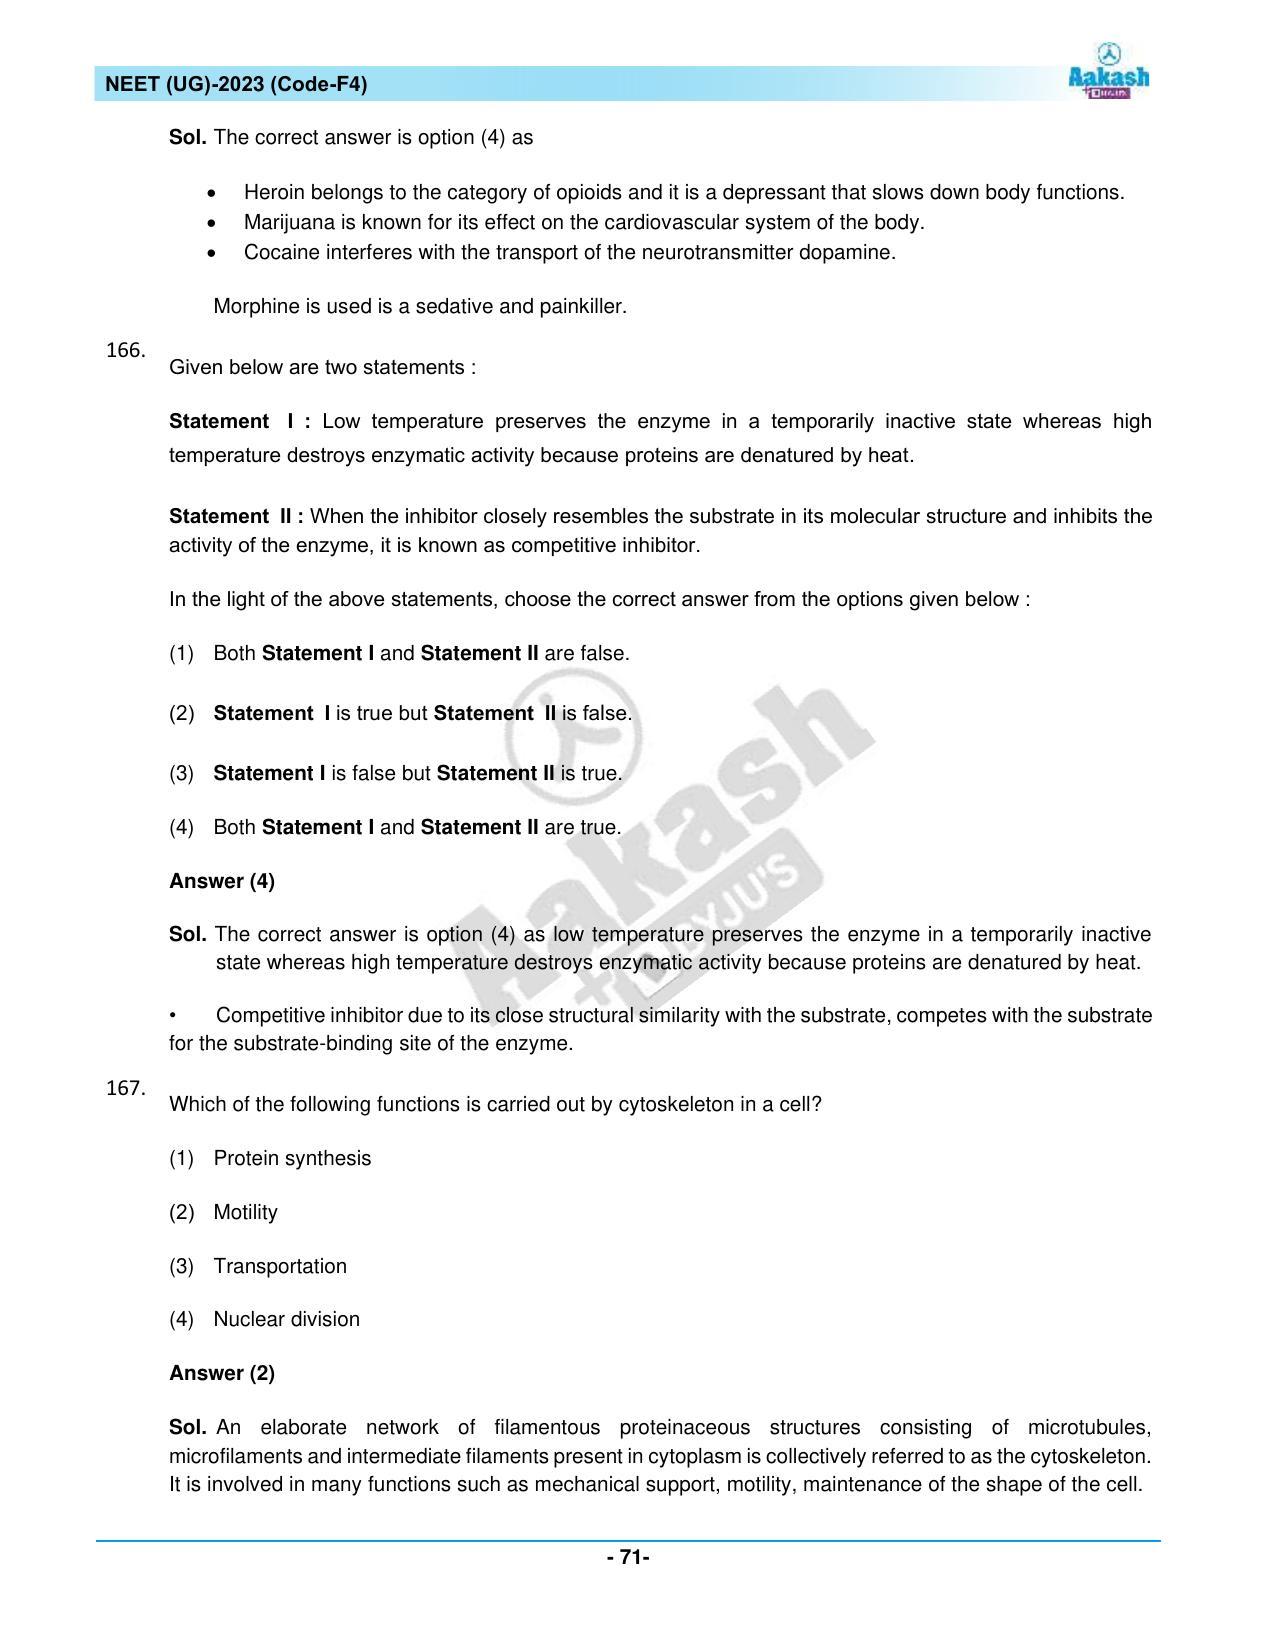 NEET 2023 Question Paper F4 - Page 71